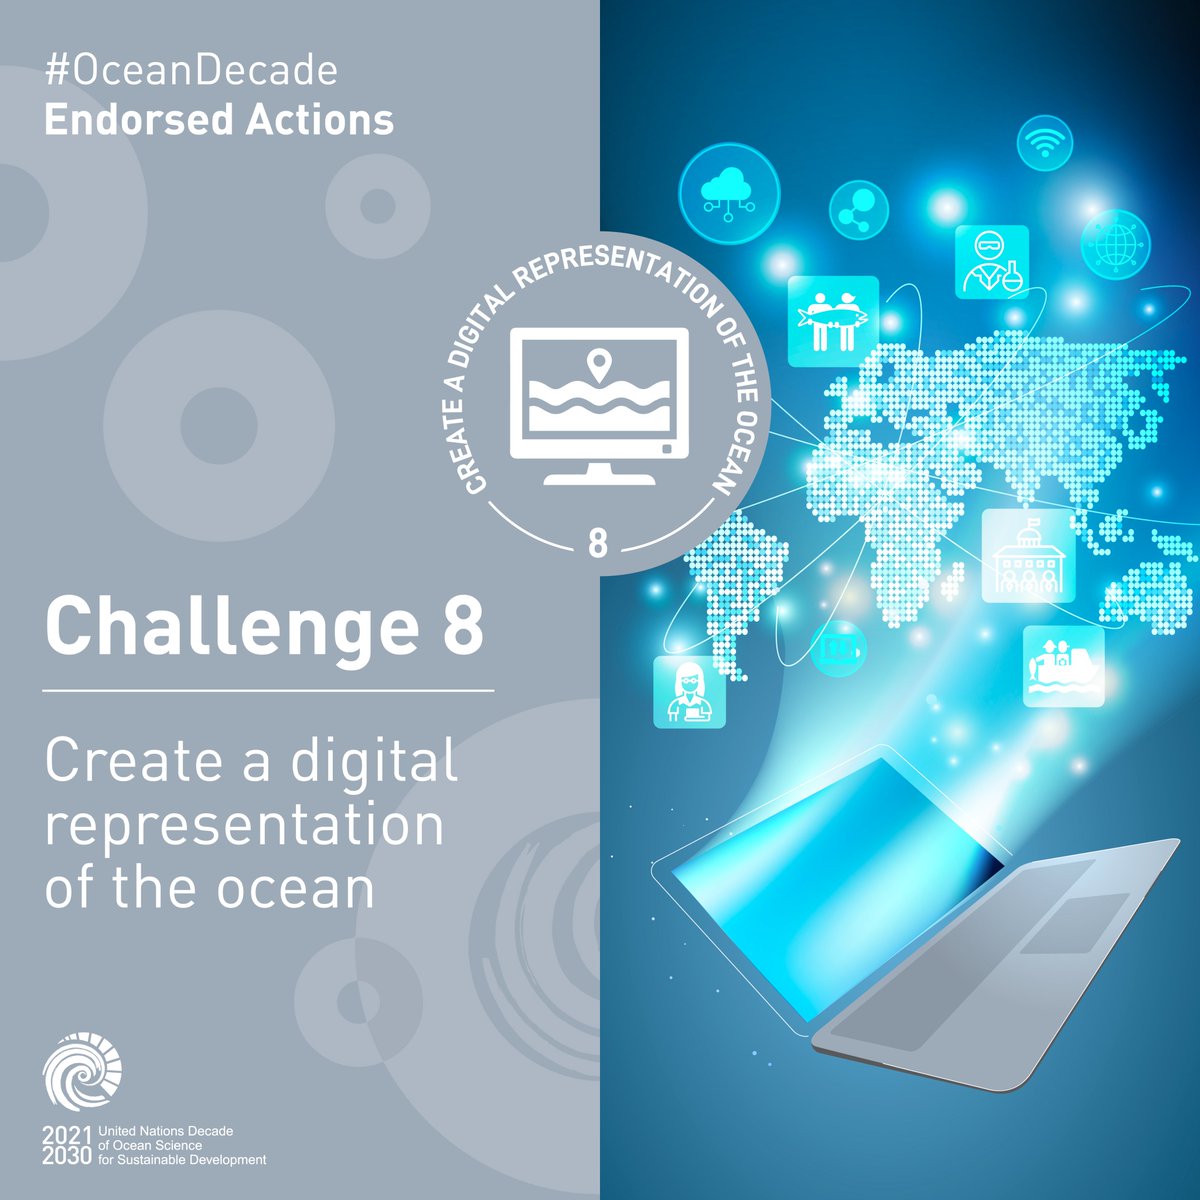 FishInfo is a free digital gateway to: 🔹dashboards 🔹databases 🔹geospatial platforms with info on #fisheries & #aquaculture spanning countries & thousands of species. It's our contribution to the #OceanDecade's challenge 8⃣. Explore it now👉 bit.ly/3CWRP0d